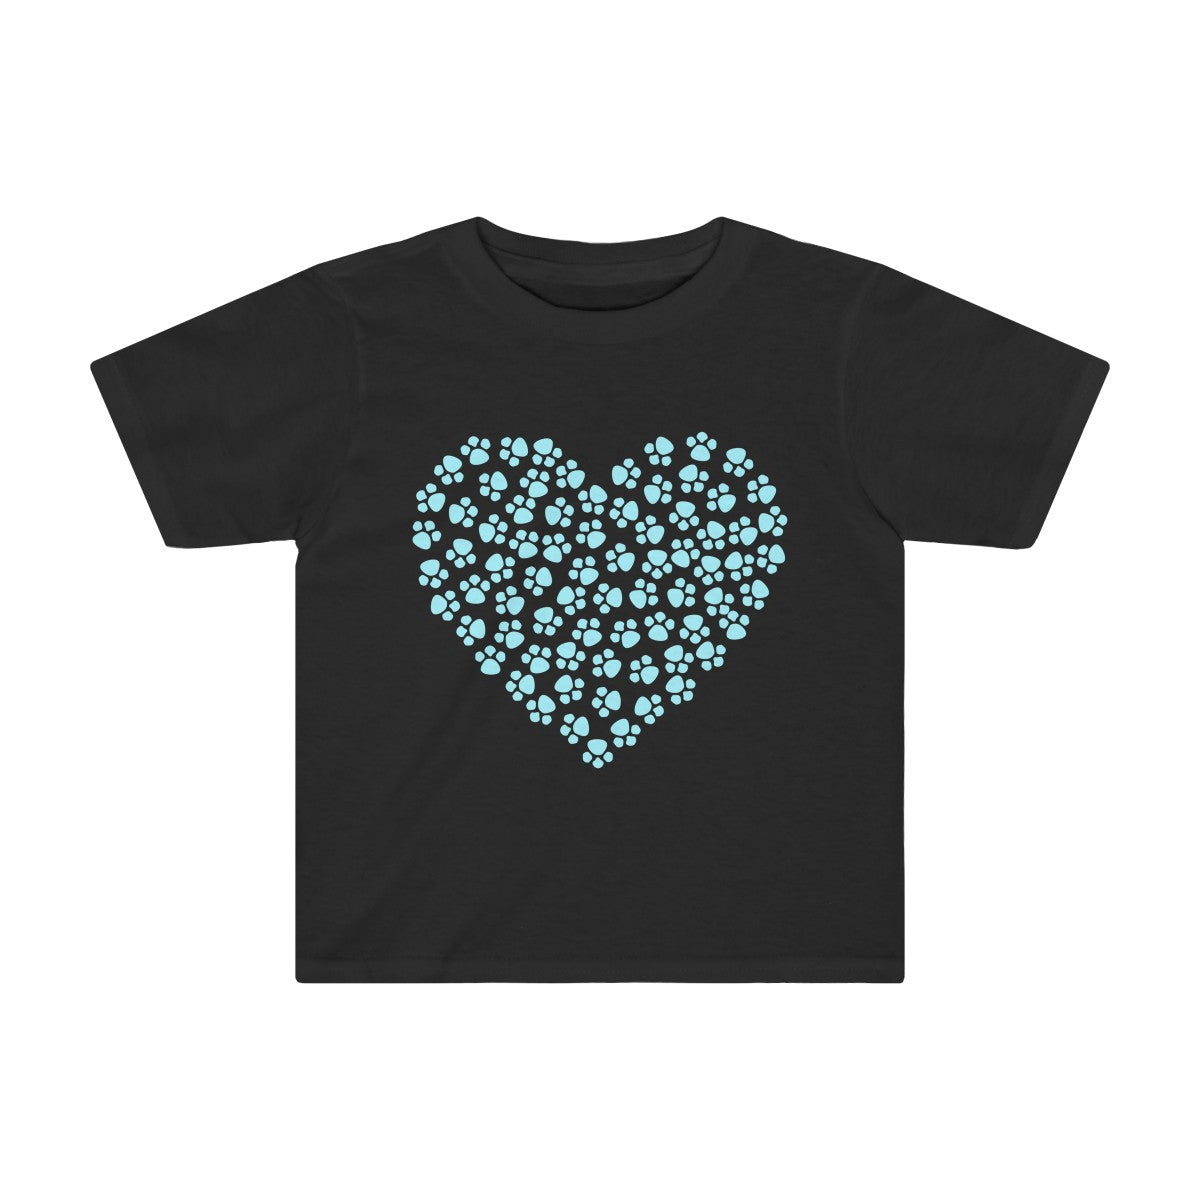 Paw Hearts Kids Tee-Kids clothes-PureDesignTees